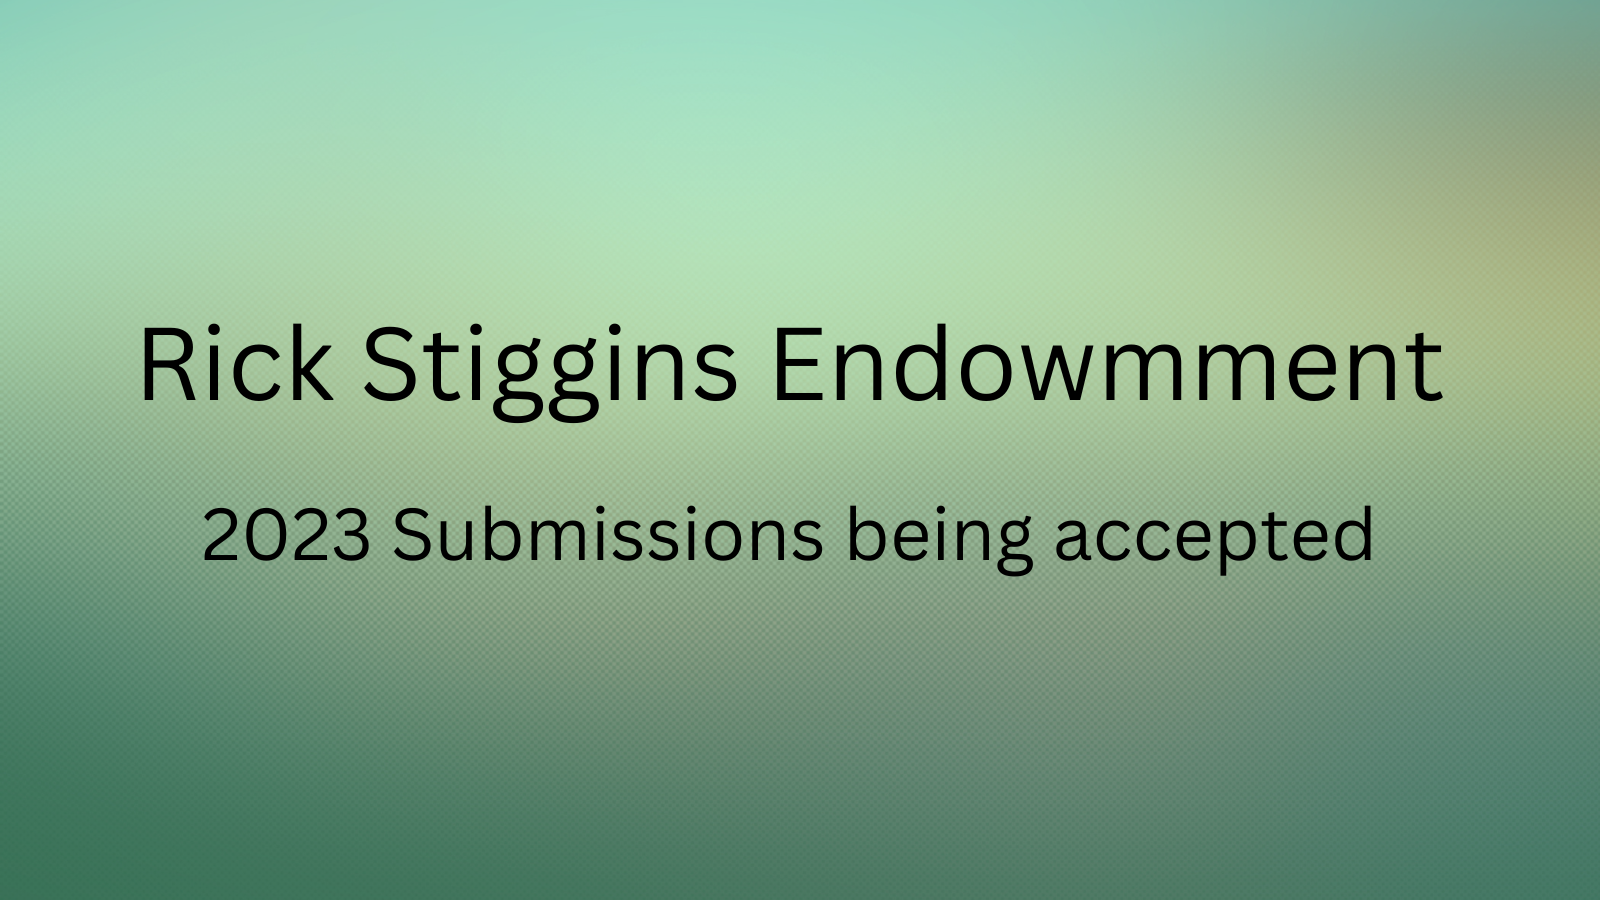 Rick Stiggins Endowment; submissions being accepted